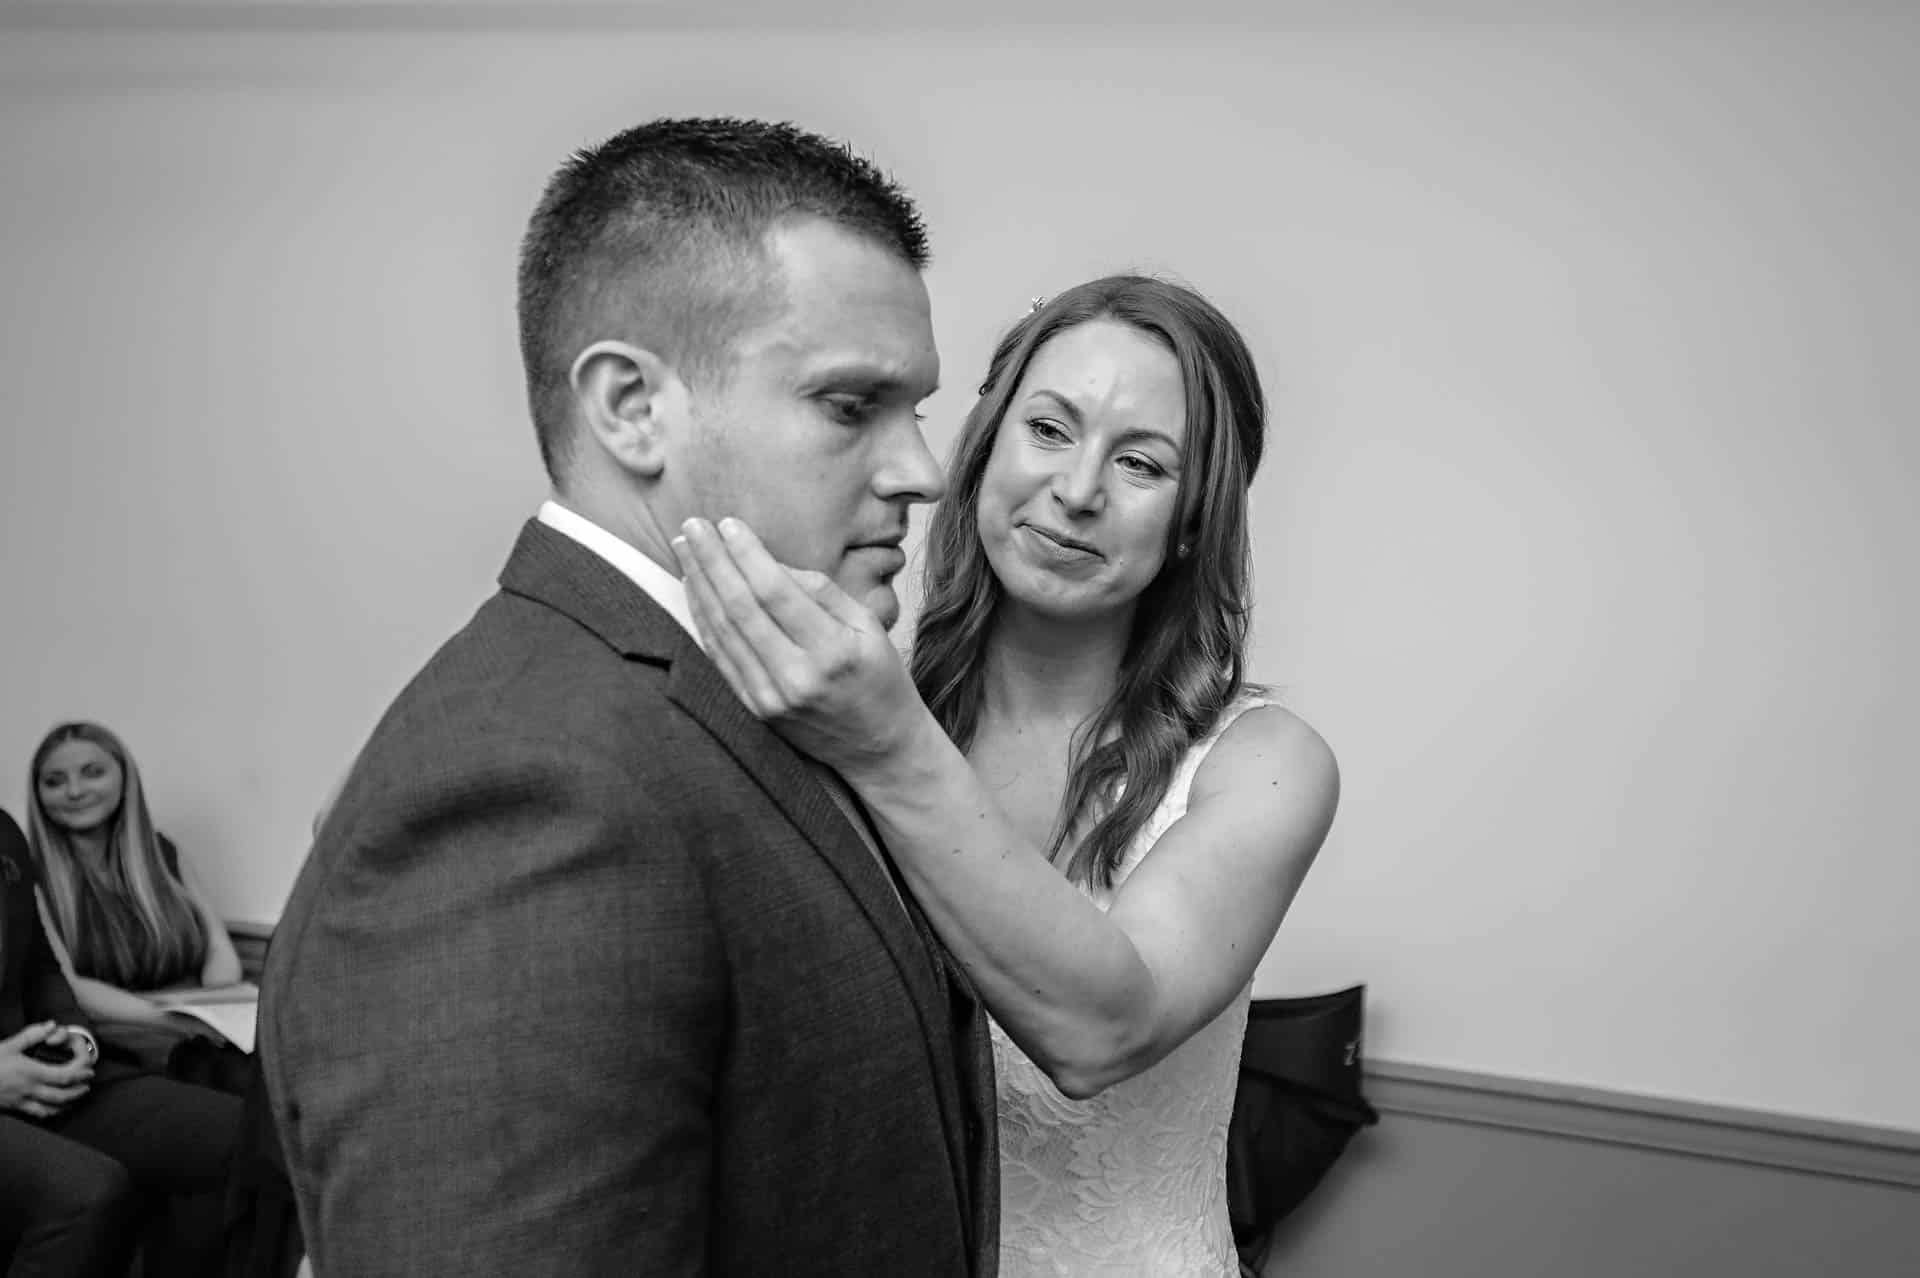 Bride holding serious groom's face during wedding vows.